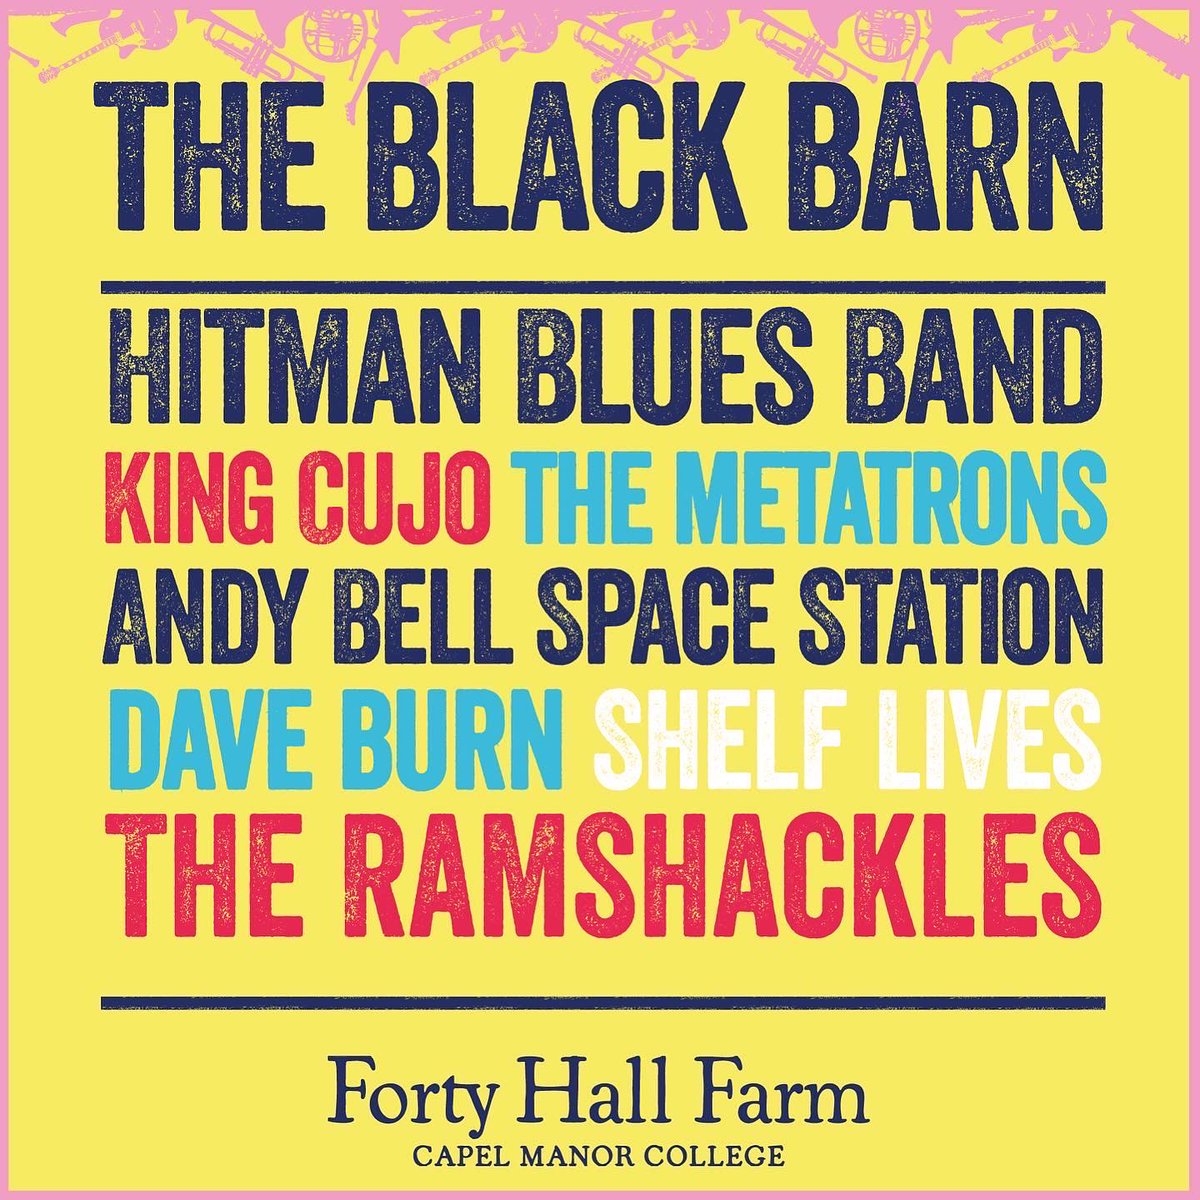 Livestock Music Festival 2022. Black Barn stage line-up out now. Tickets still available at buytickets.at/livestockmusic… #LivestockMusic #LiveMusic #MusicFestival #GreatDaysOut #EnfieldEvents #FortyHall @Forty_Hall @fortyhallfarm @capelmanor